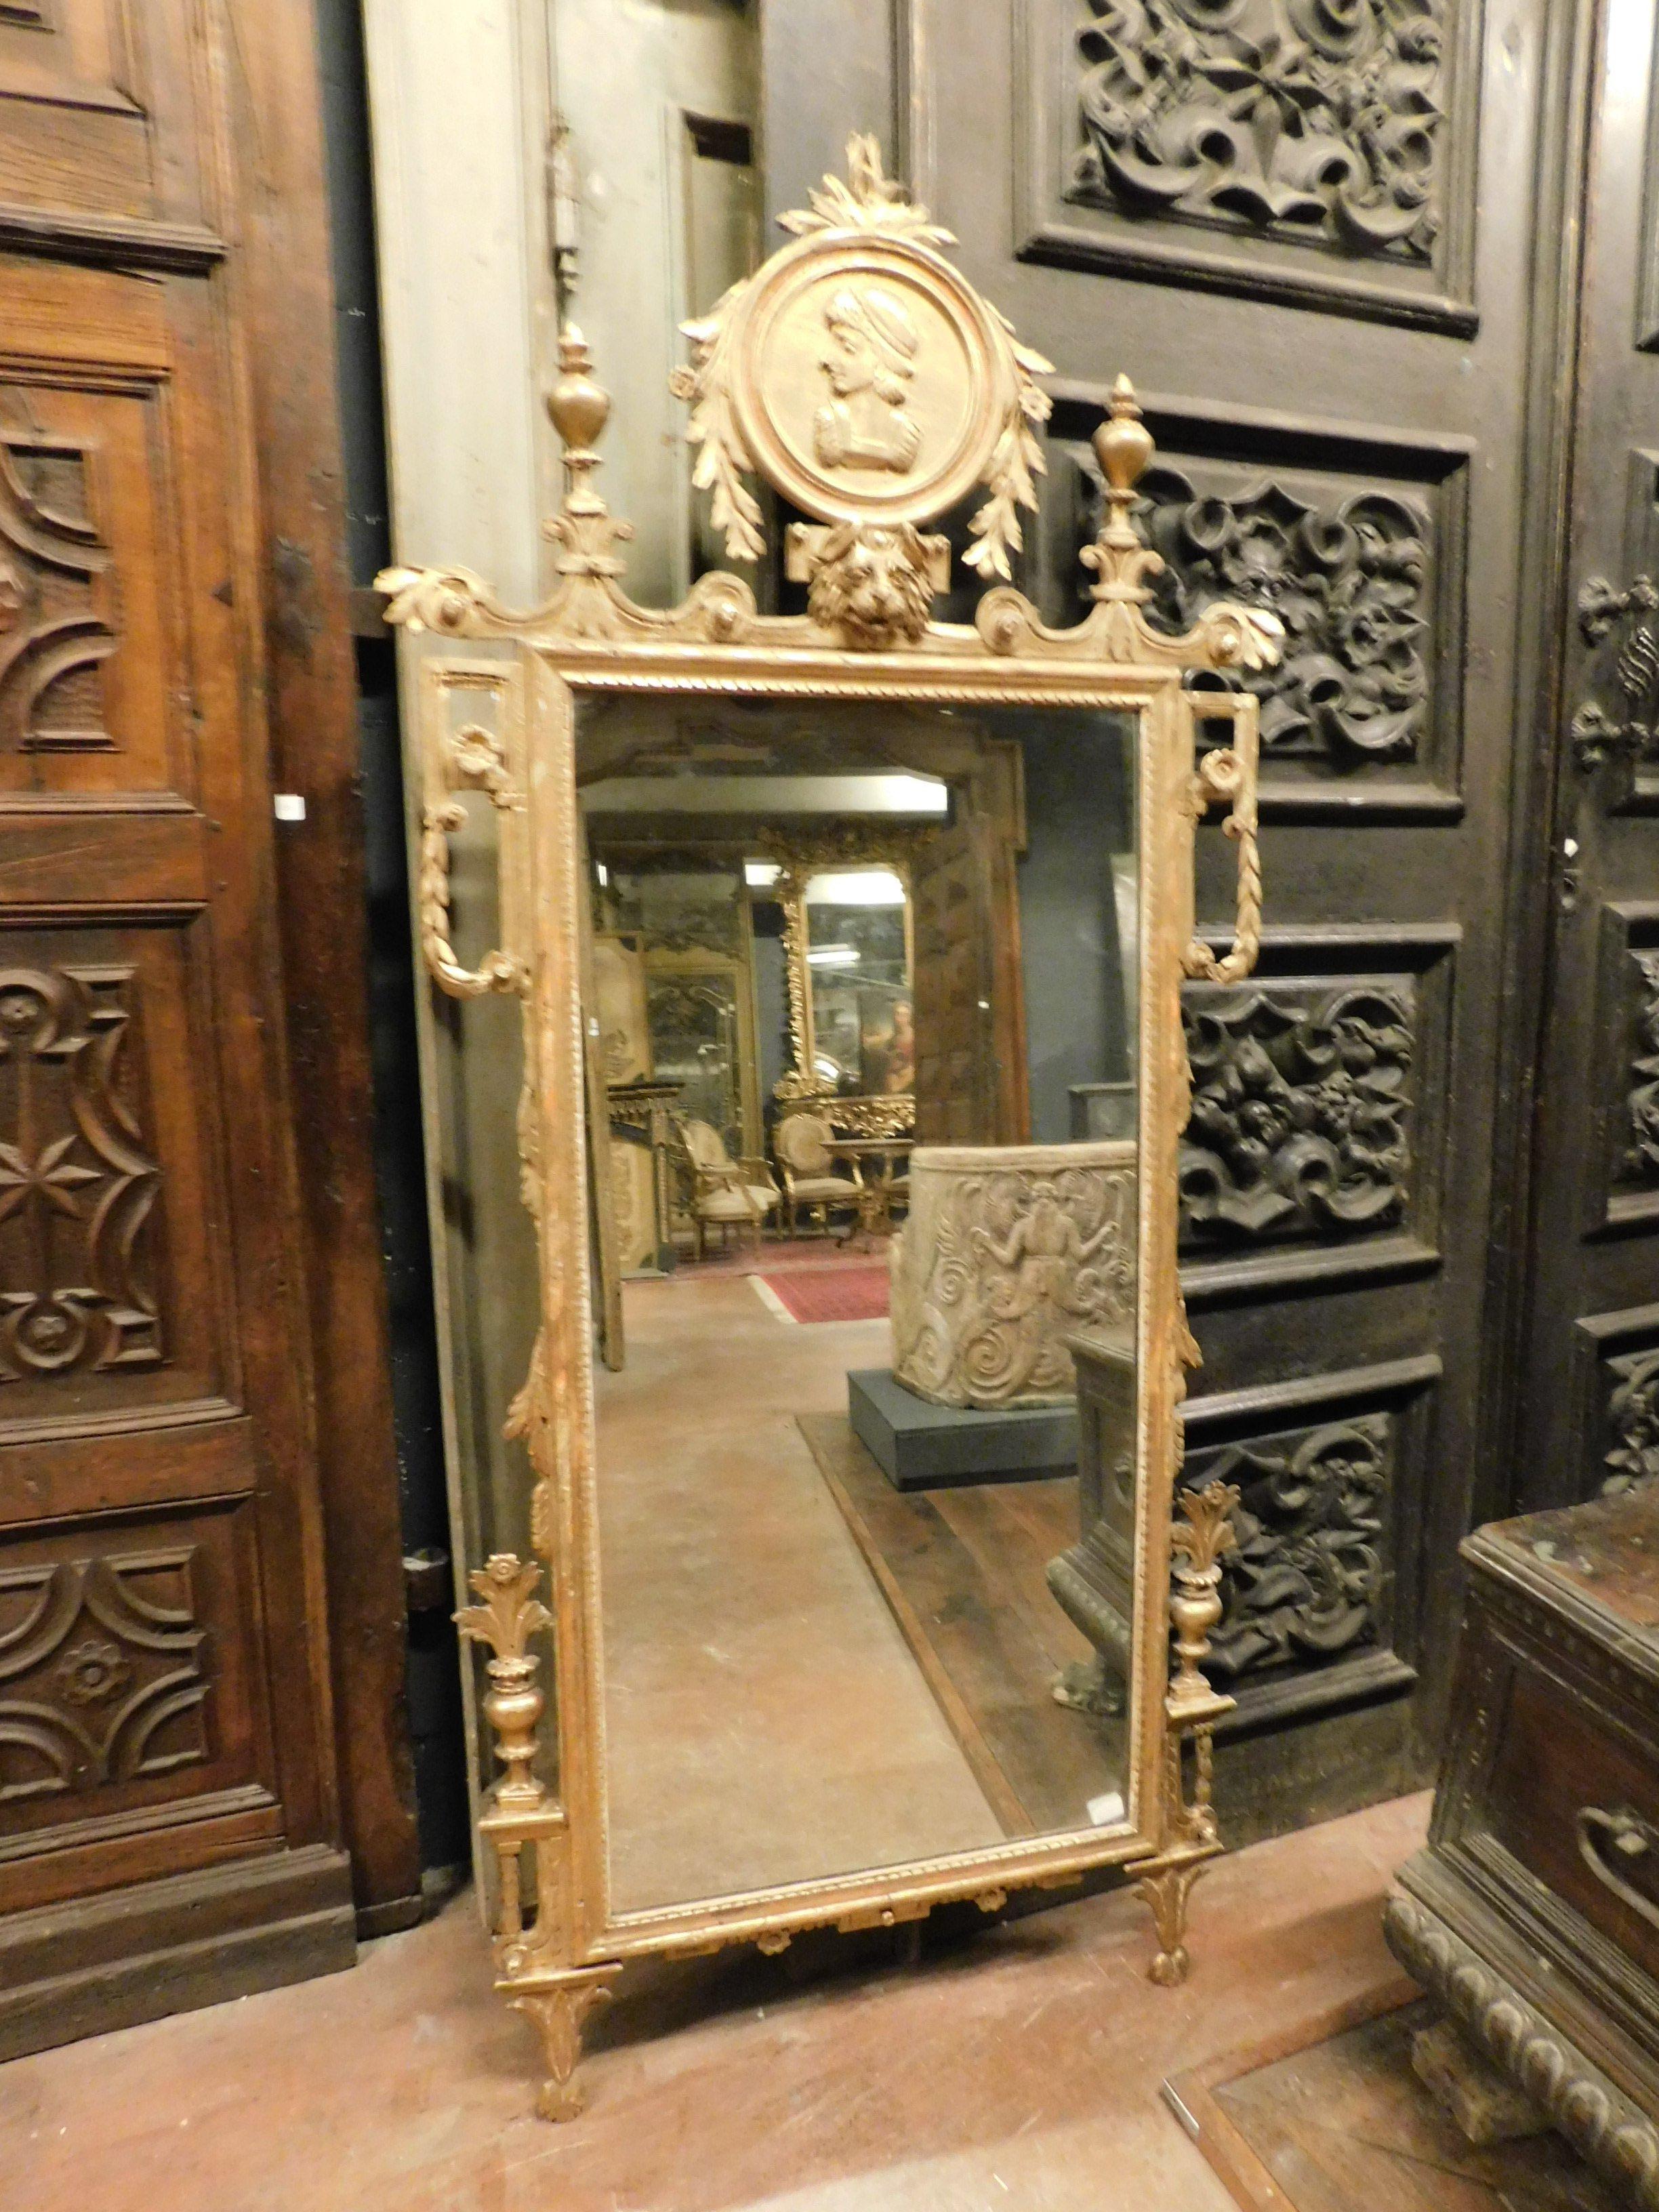 Antique mirror in gilded wood and richly carved by hand, beautiful leaf gilding, sculptures with the face of an Italian nobleman and lion, symbol of power, rich festoons and decorations, built entirely by hand in the mid-18th century for a noble